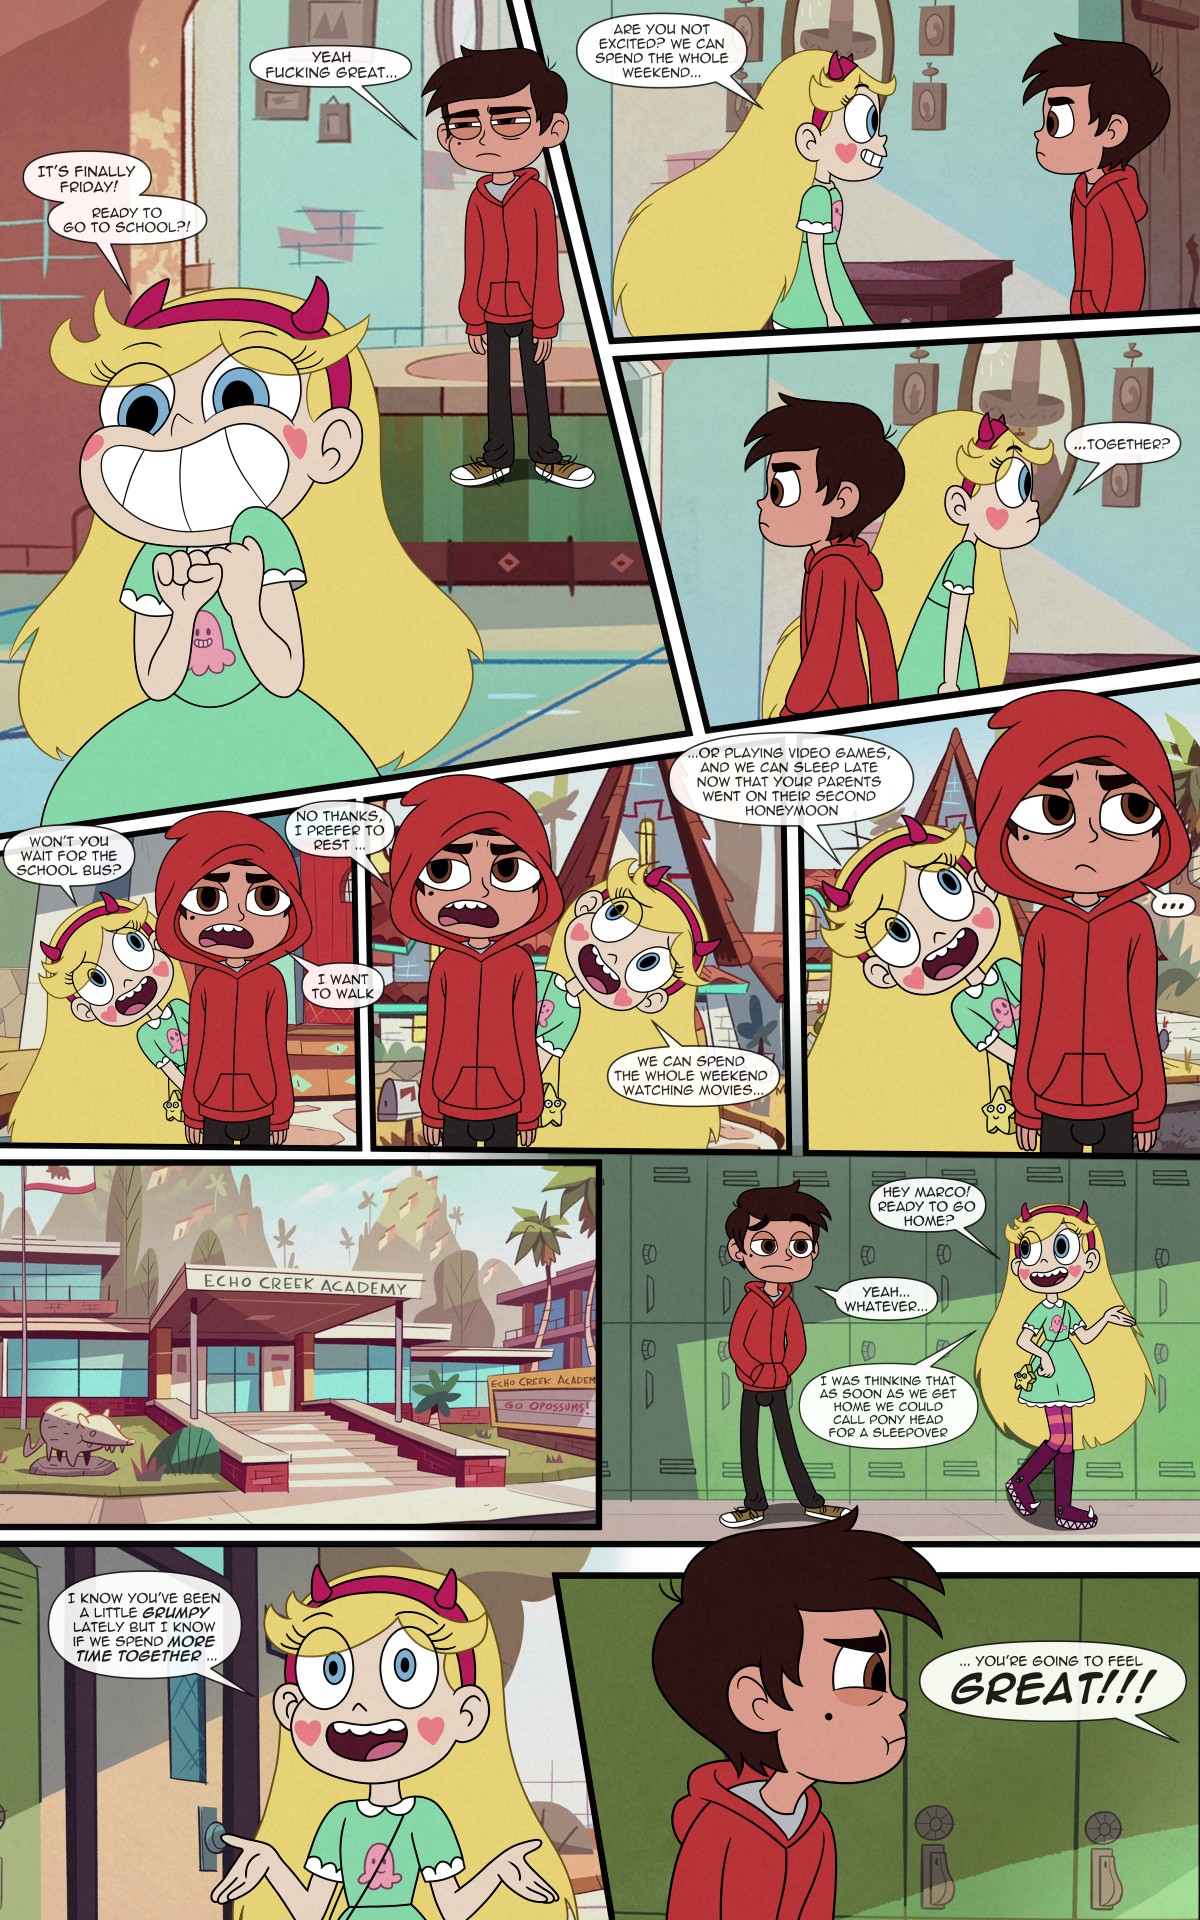 Time Together Star Vs The Forces Of Evil 04